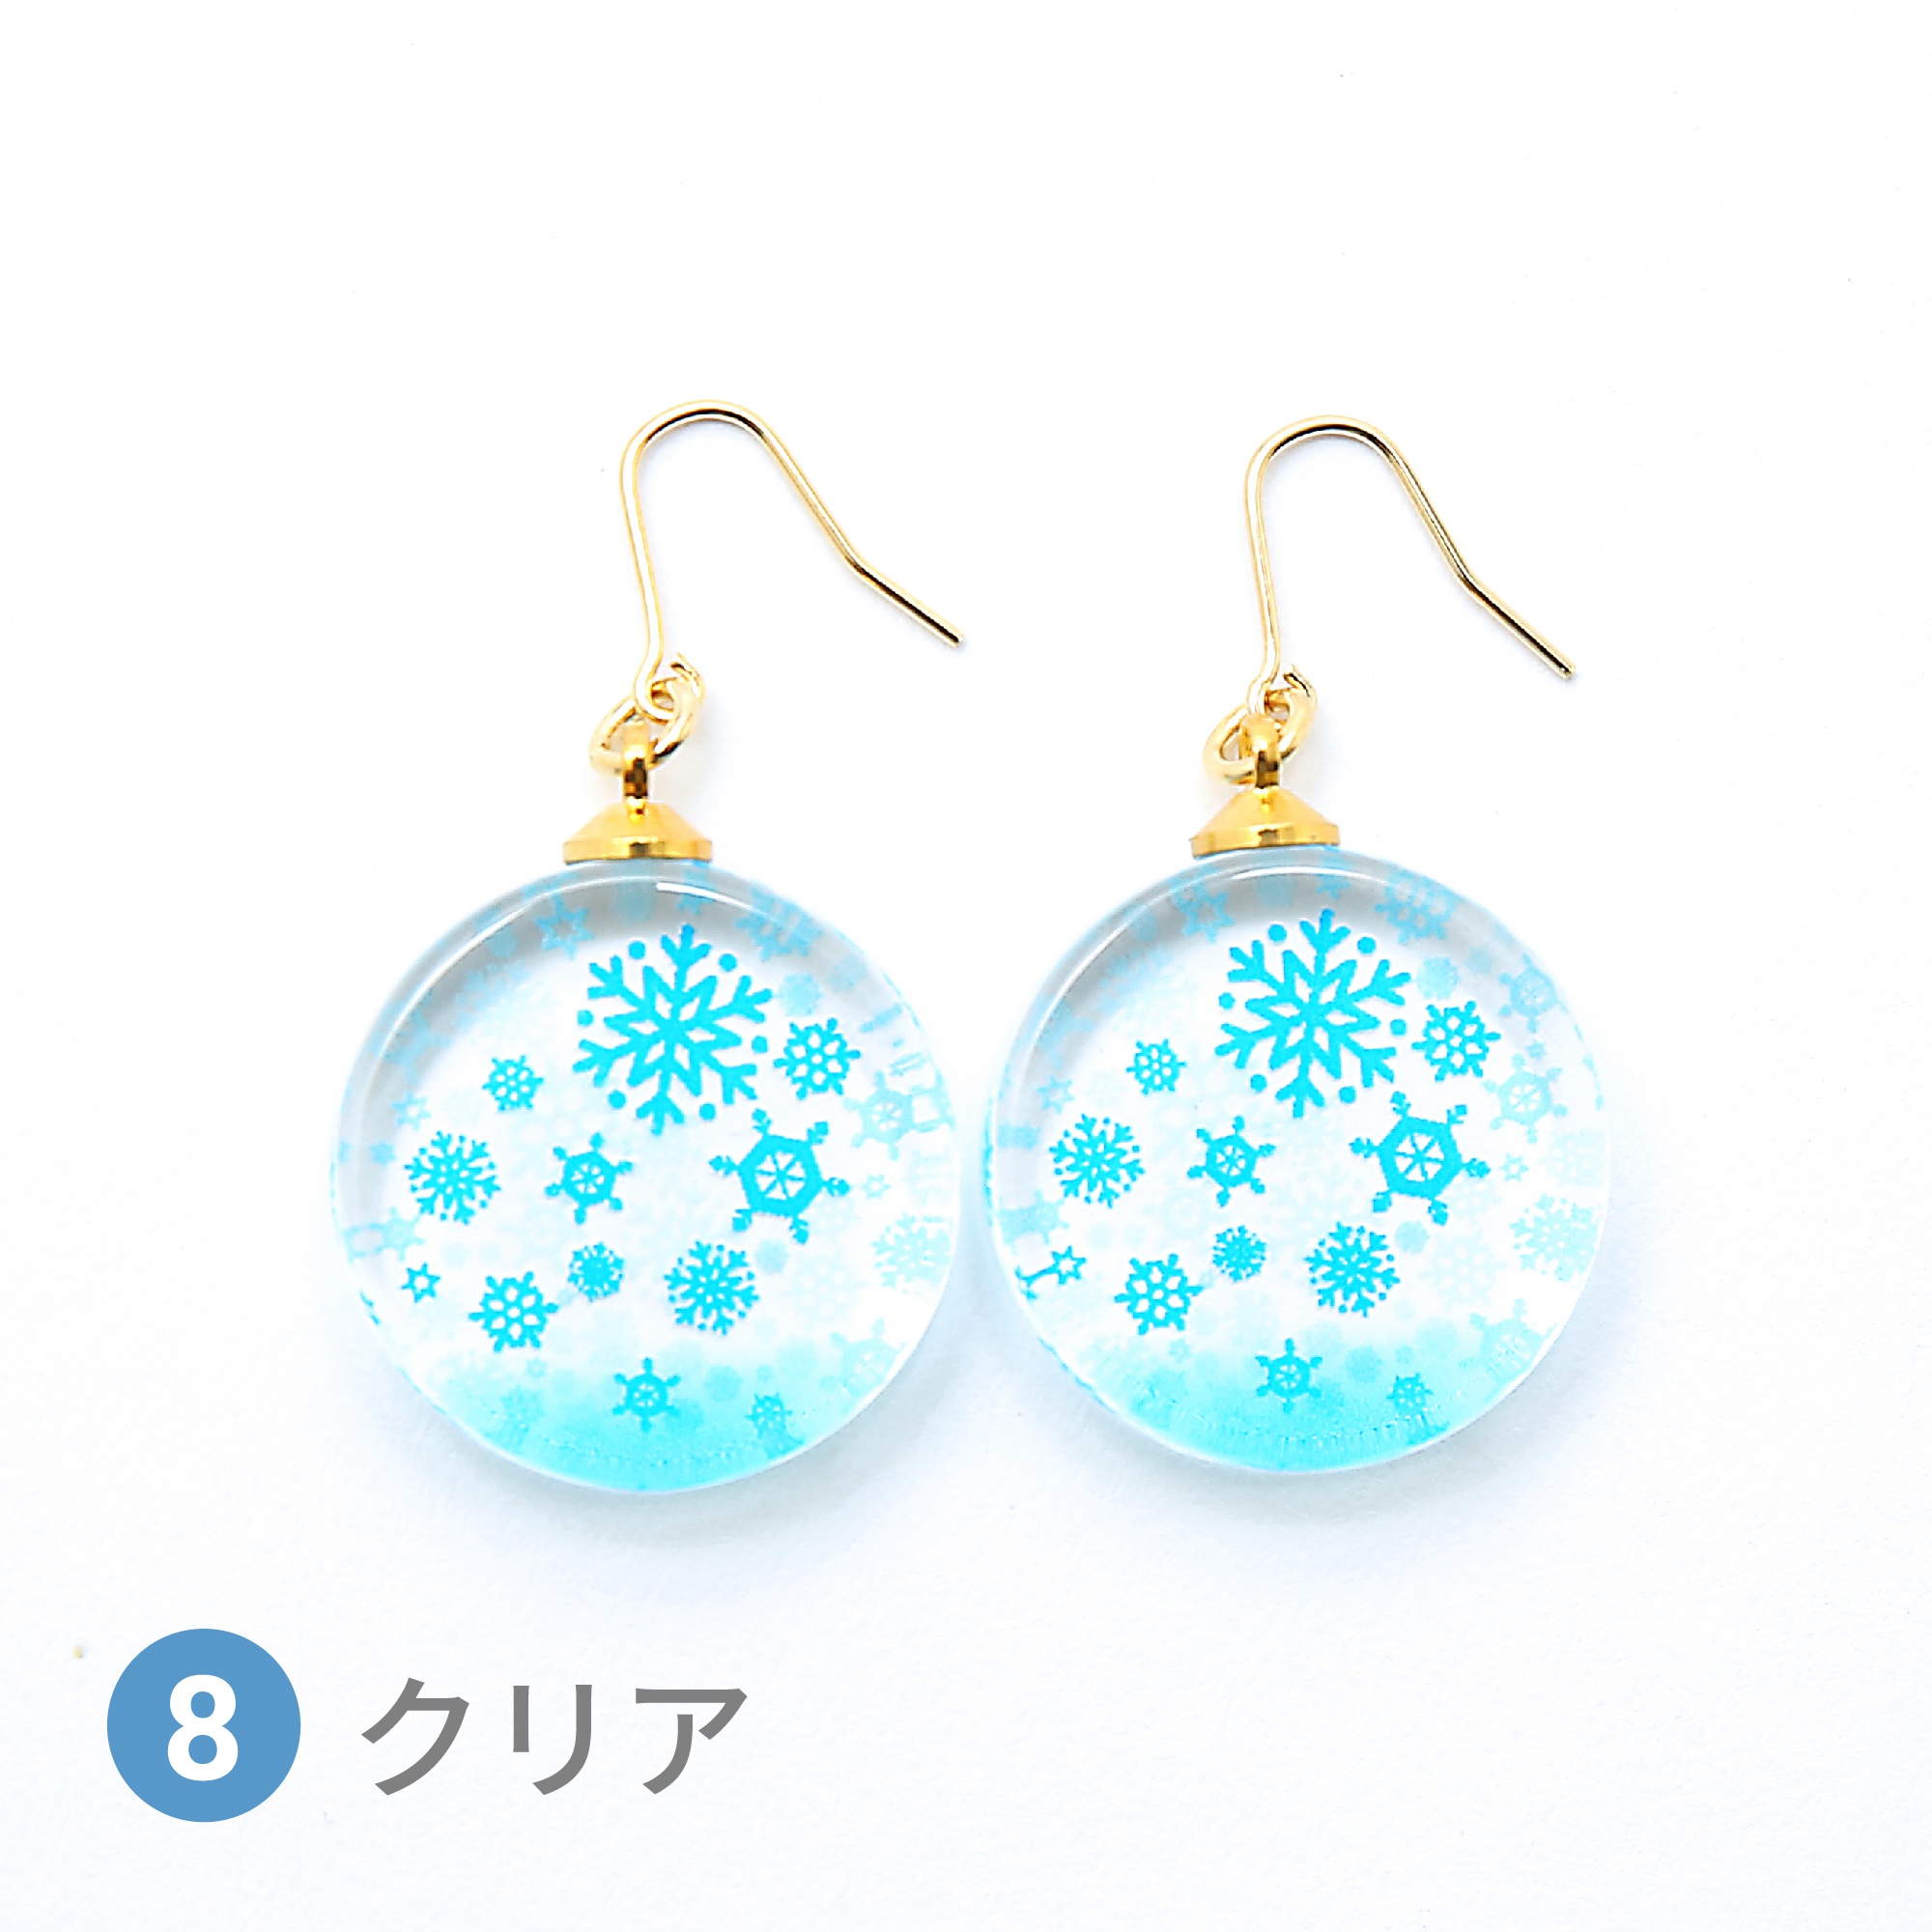 Glass accessories Pierced Earring Shiny winter clear round shape